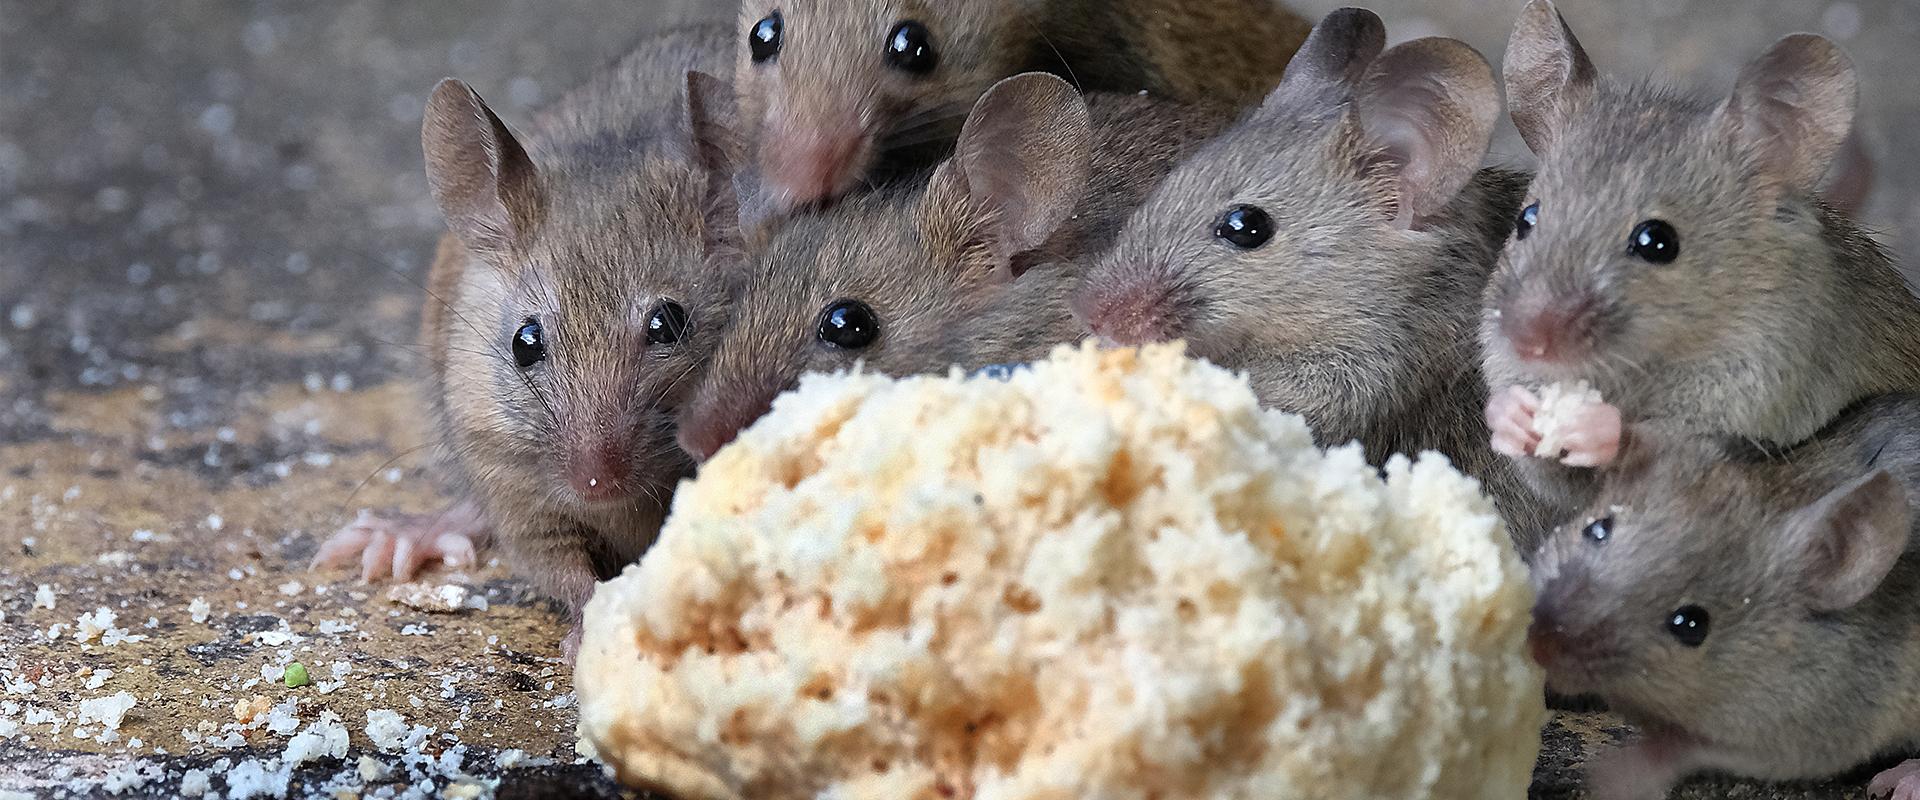 mice eating a biscuit